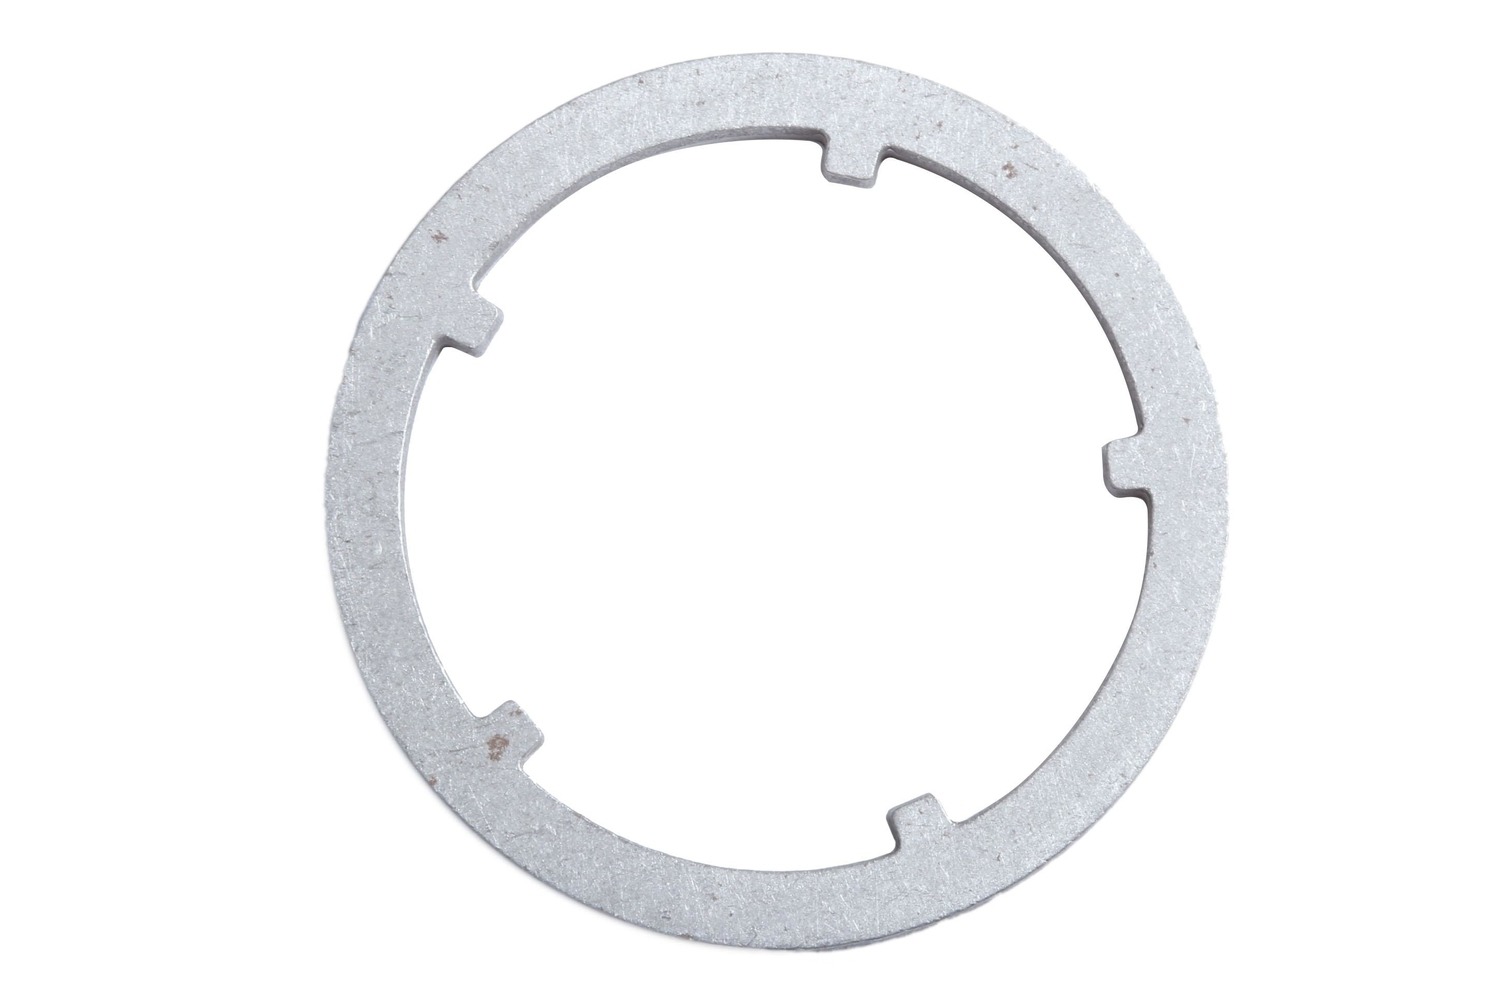 GM GENUINE PARTS - Automatic Transmission Differential Carrier Internal Thrust Washer - GMP 24213486